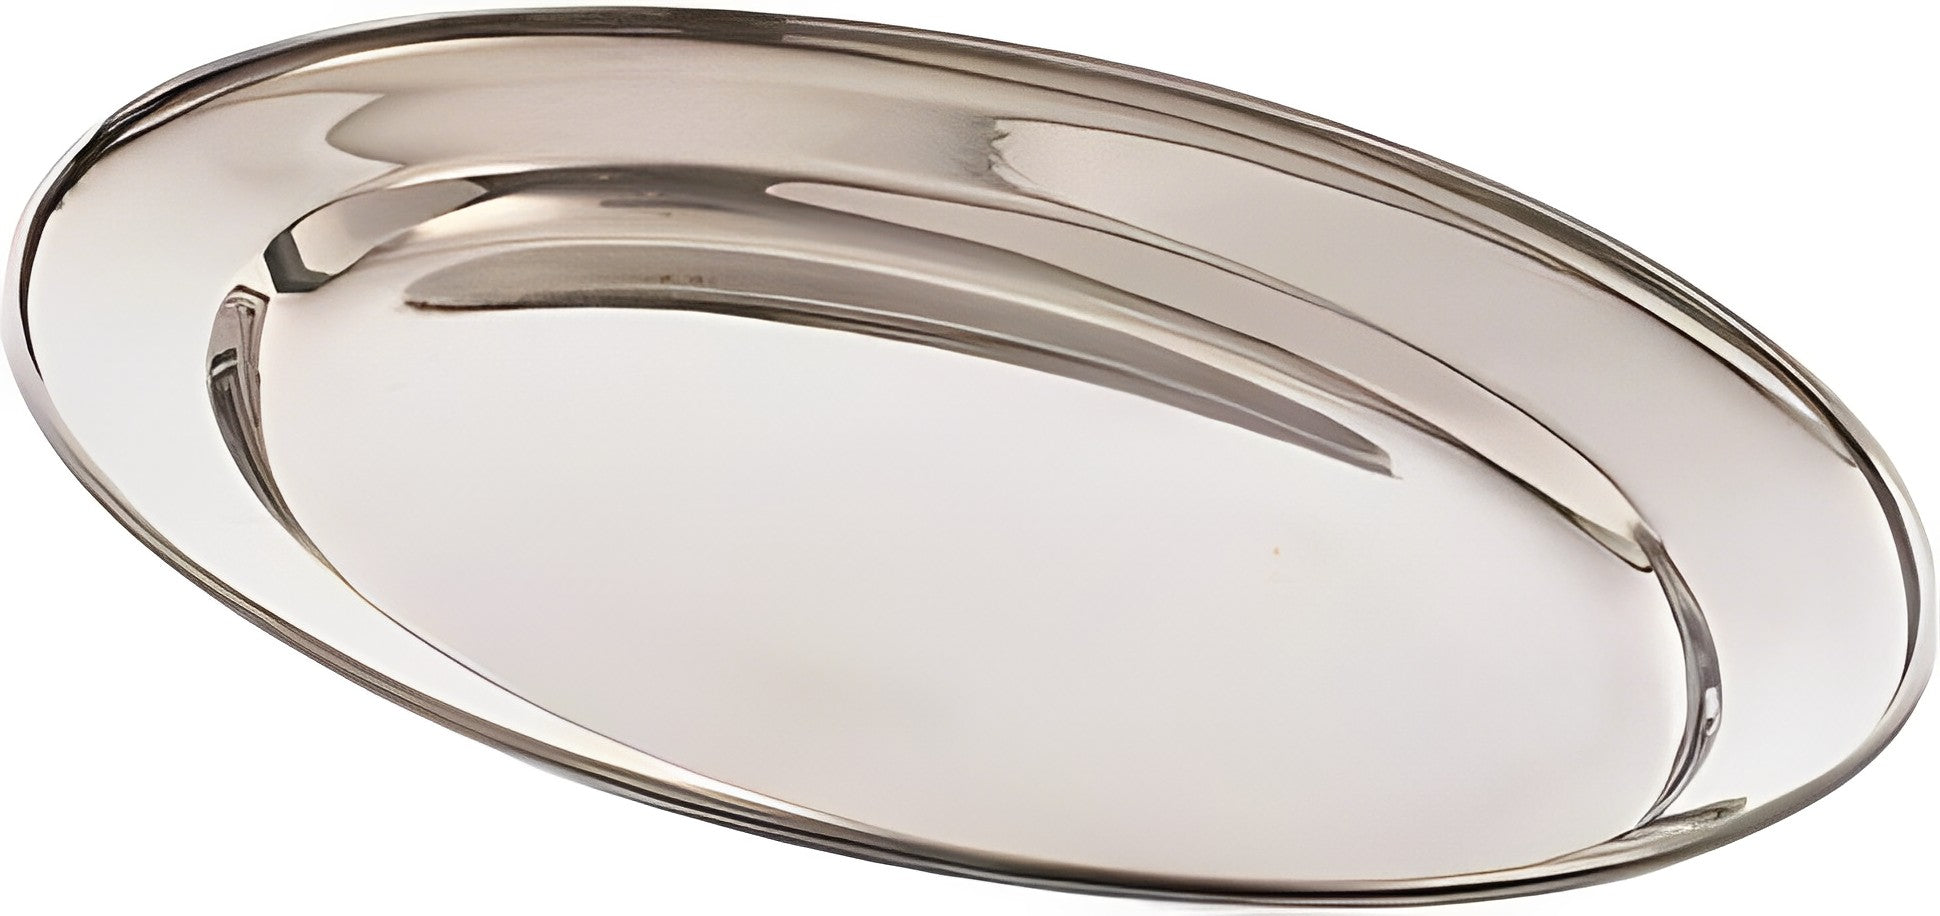 Browne - 24" Stainless Steel Oval Platter - 574186